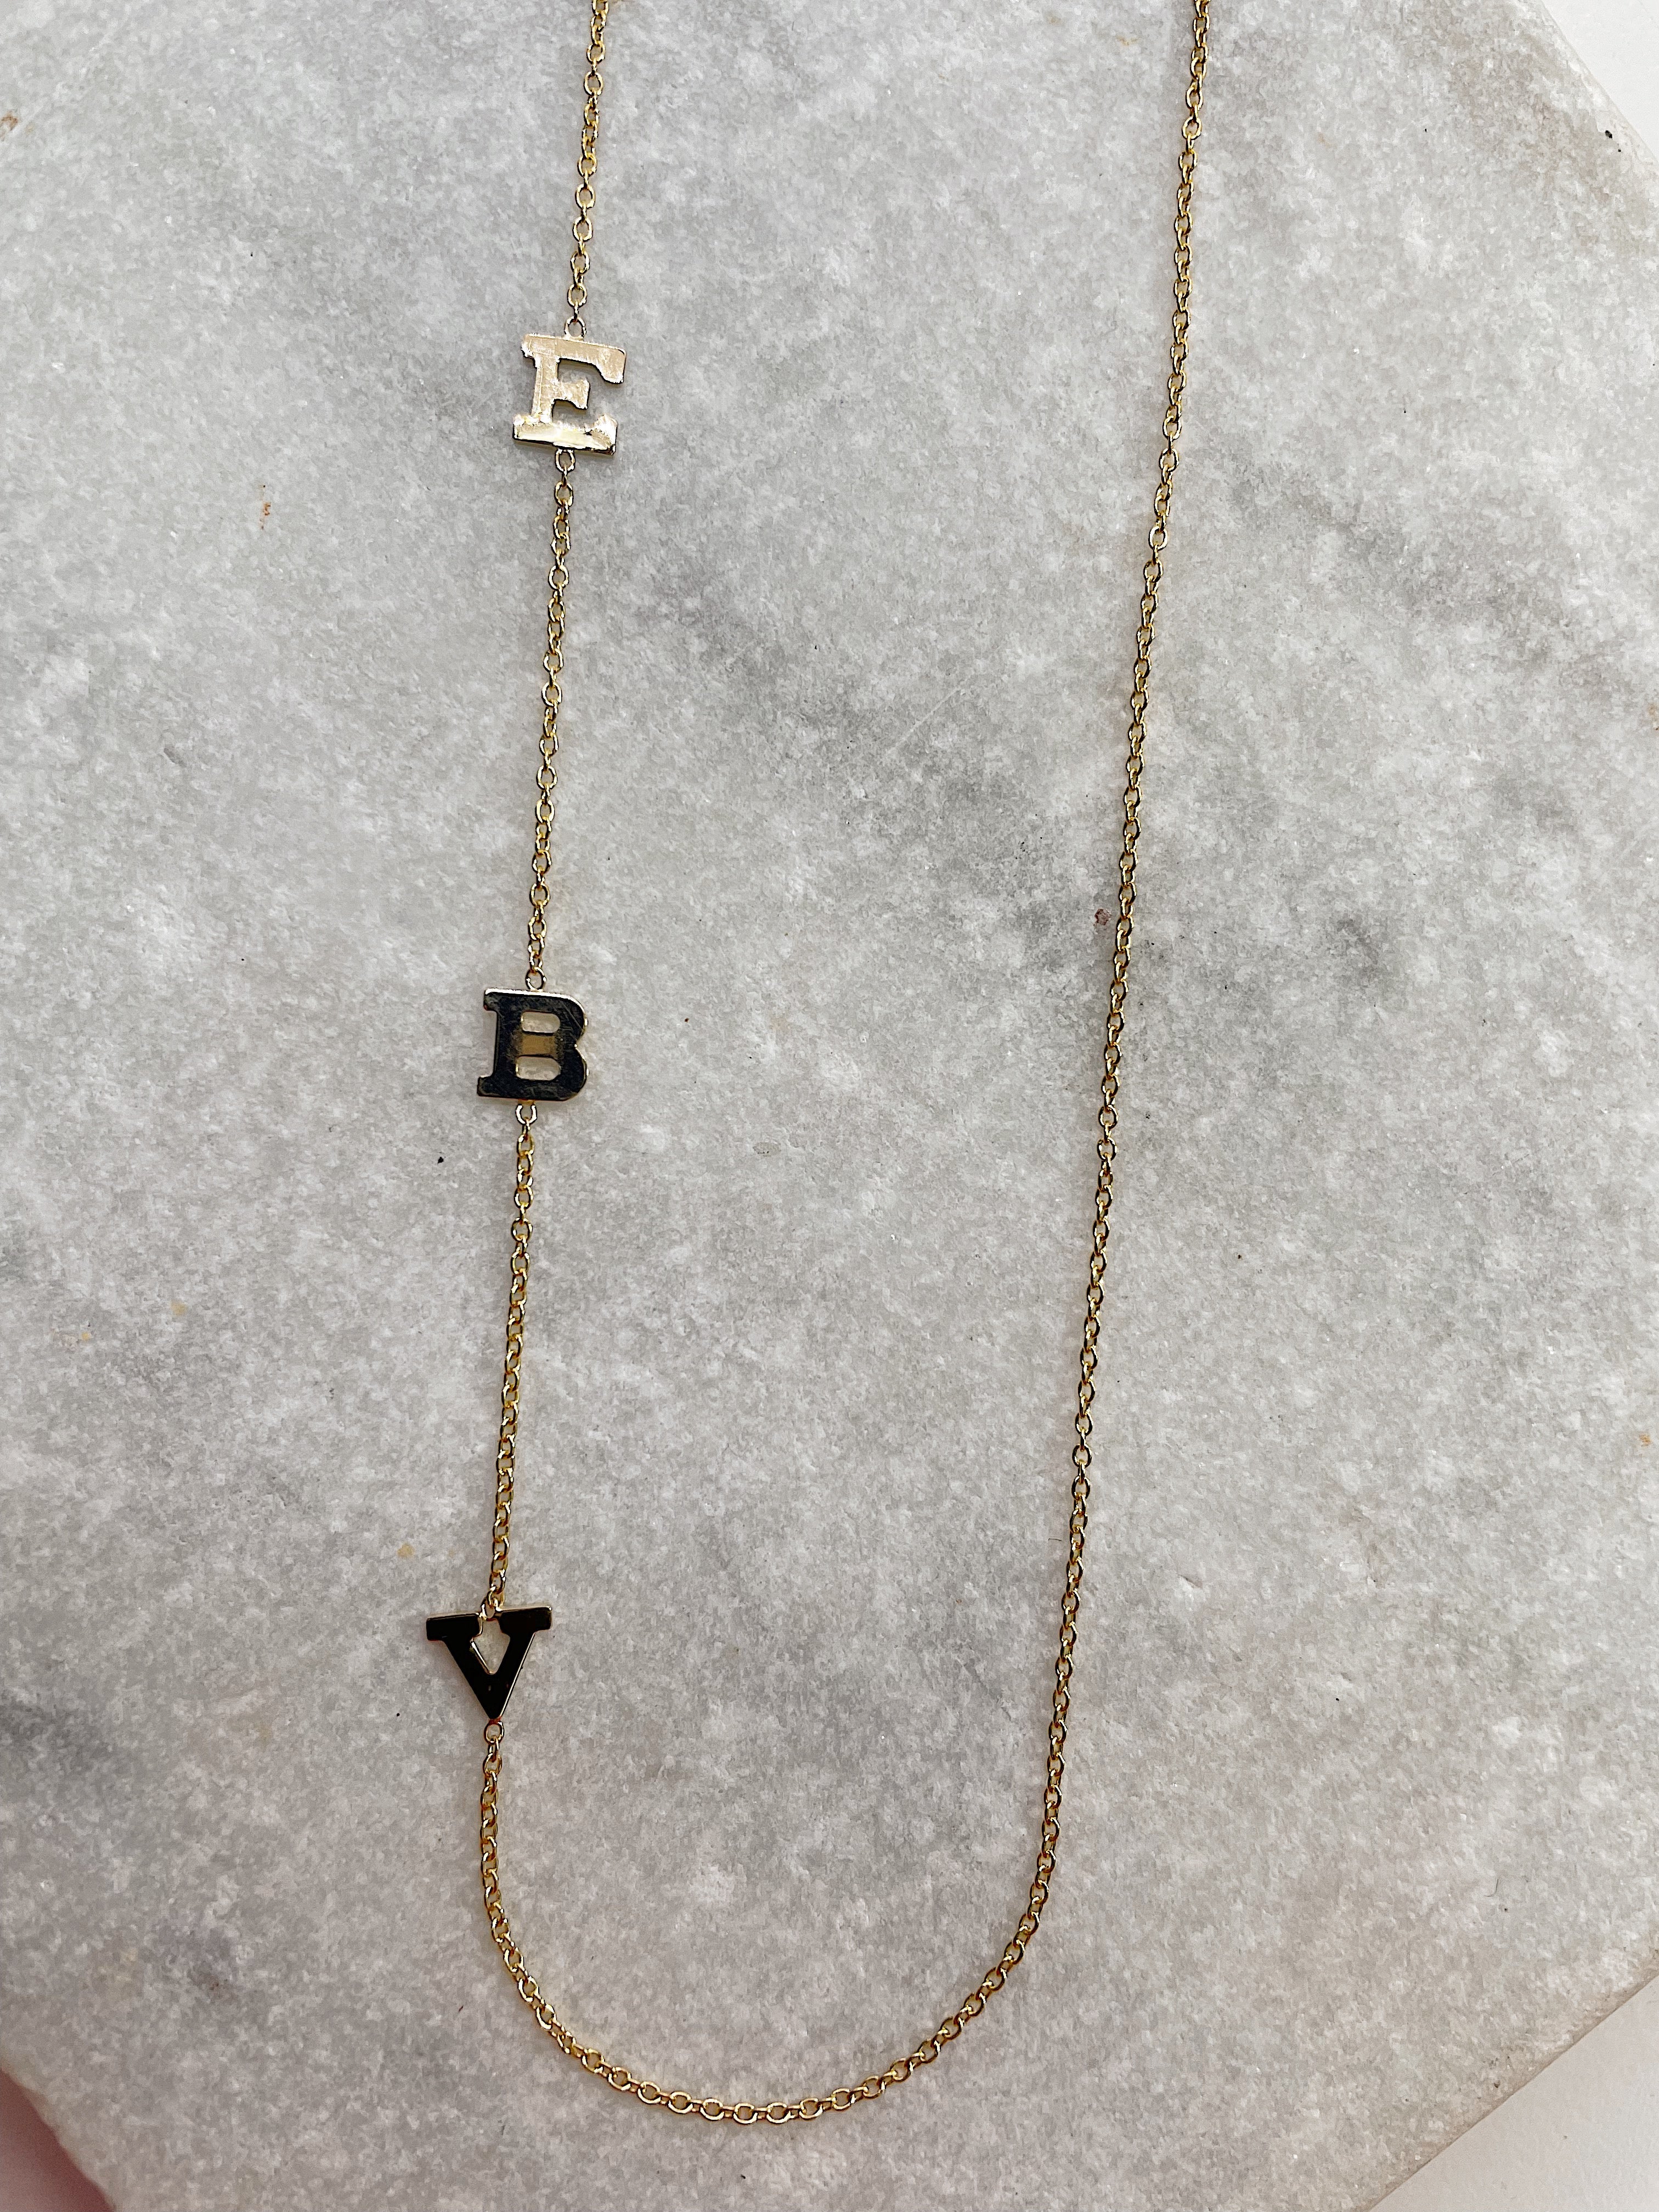 14k Gold Initial Necklace - 3 Circles - Uppercase | Tiny Tags